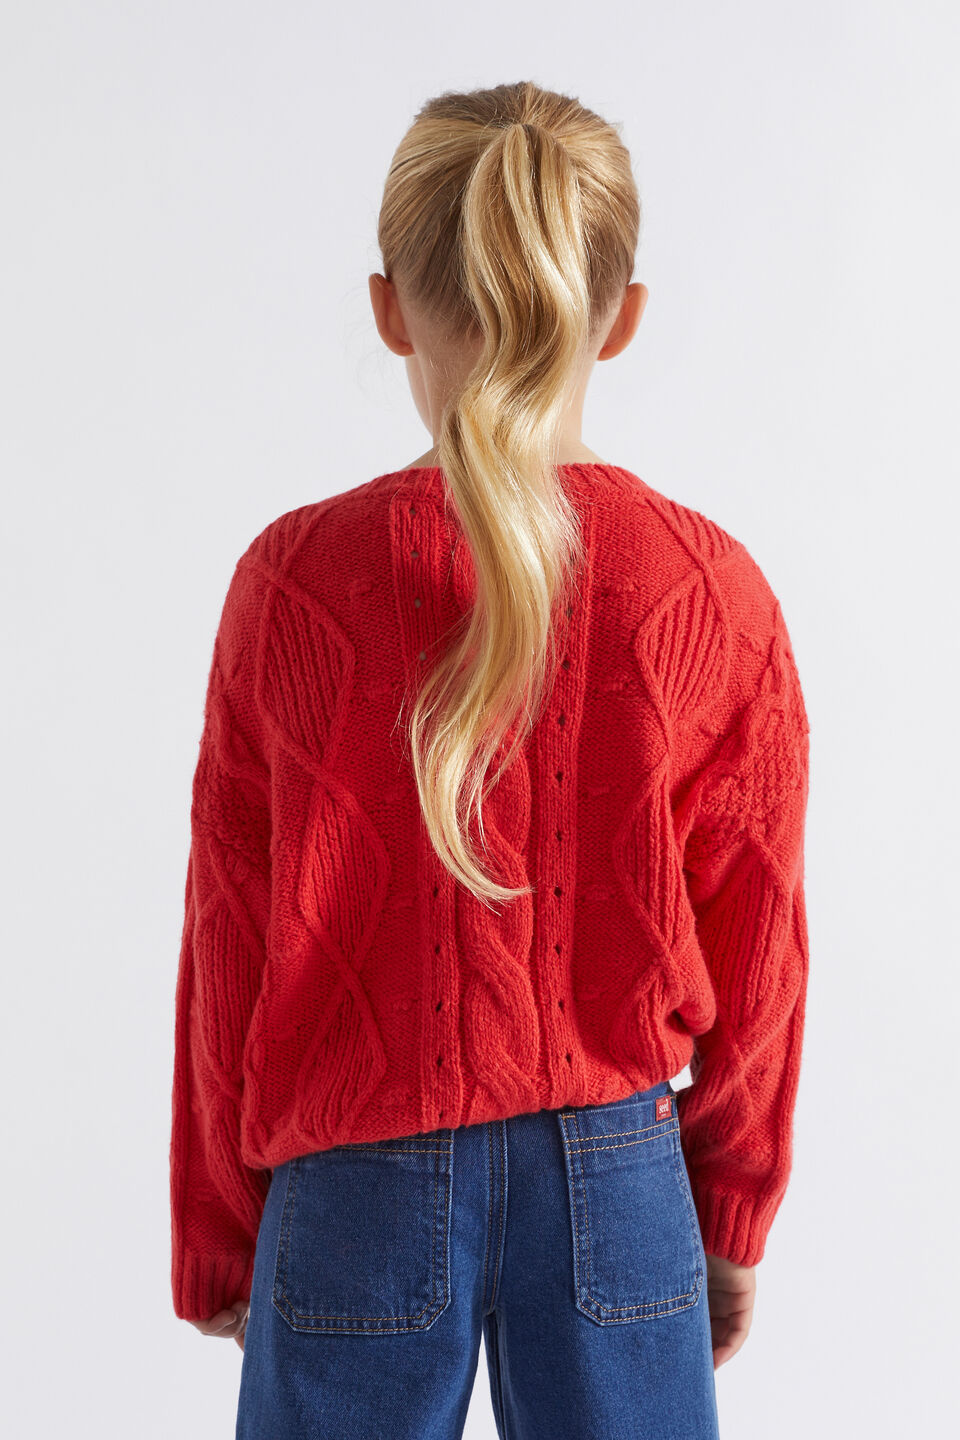 Pompom Cable Knit  Super Red